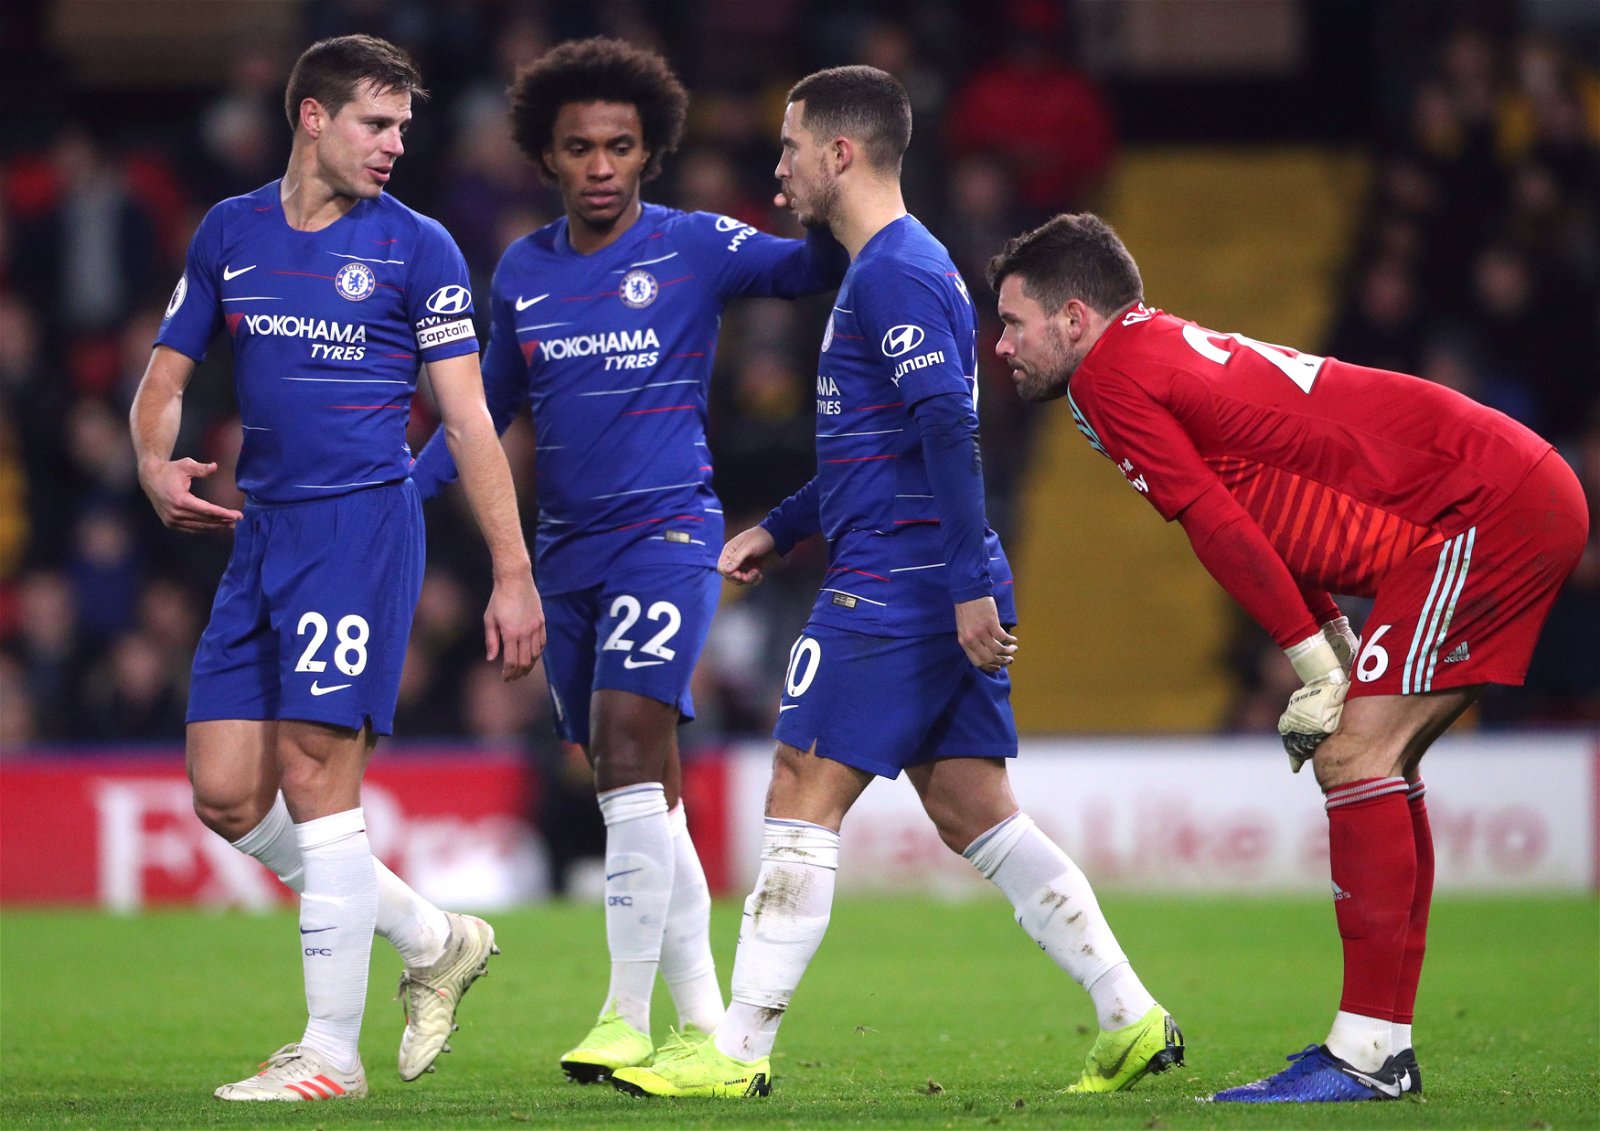 Former Chelsea star tells why Chelsea will LOSE Carabao Cup Final